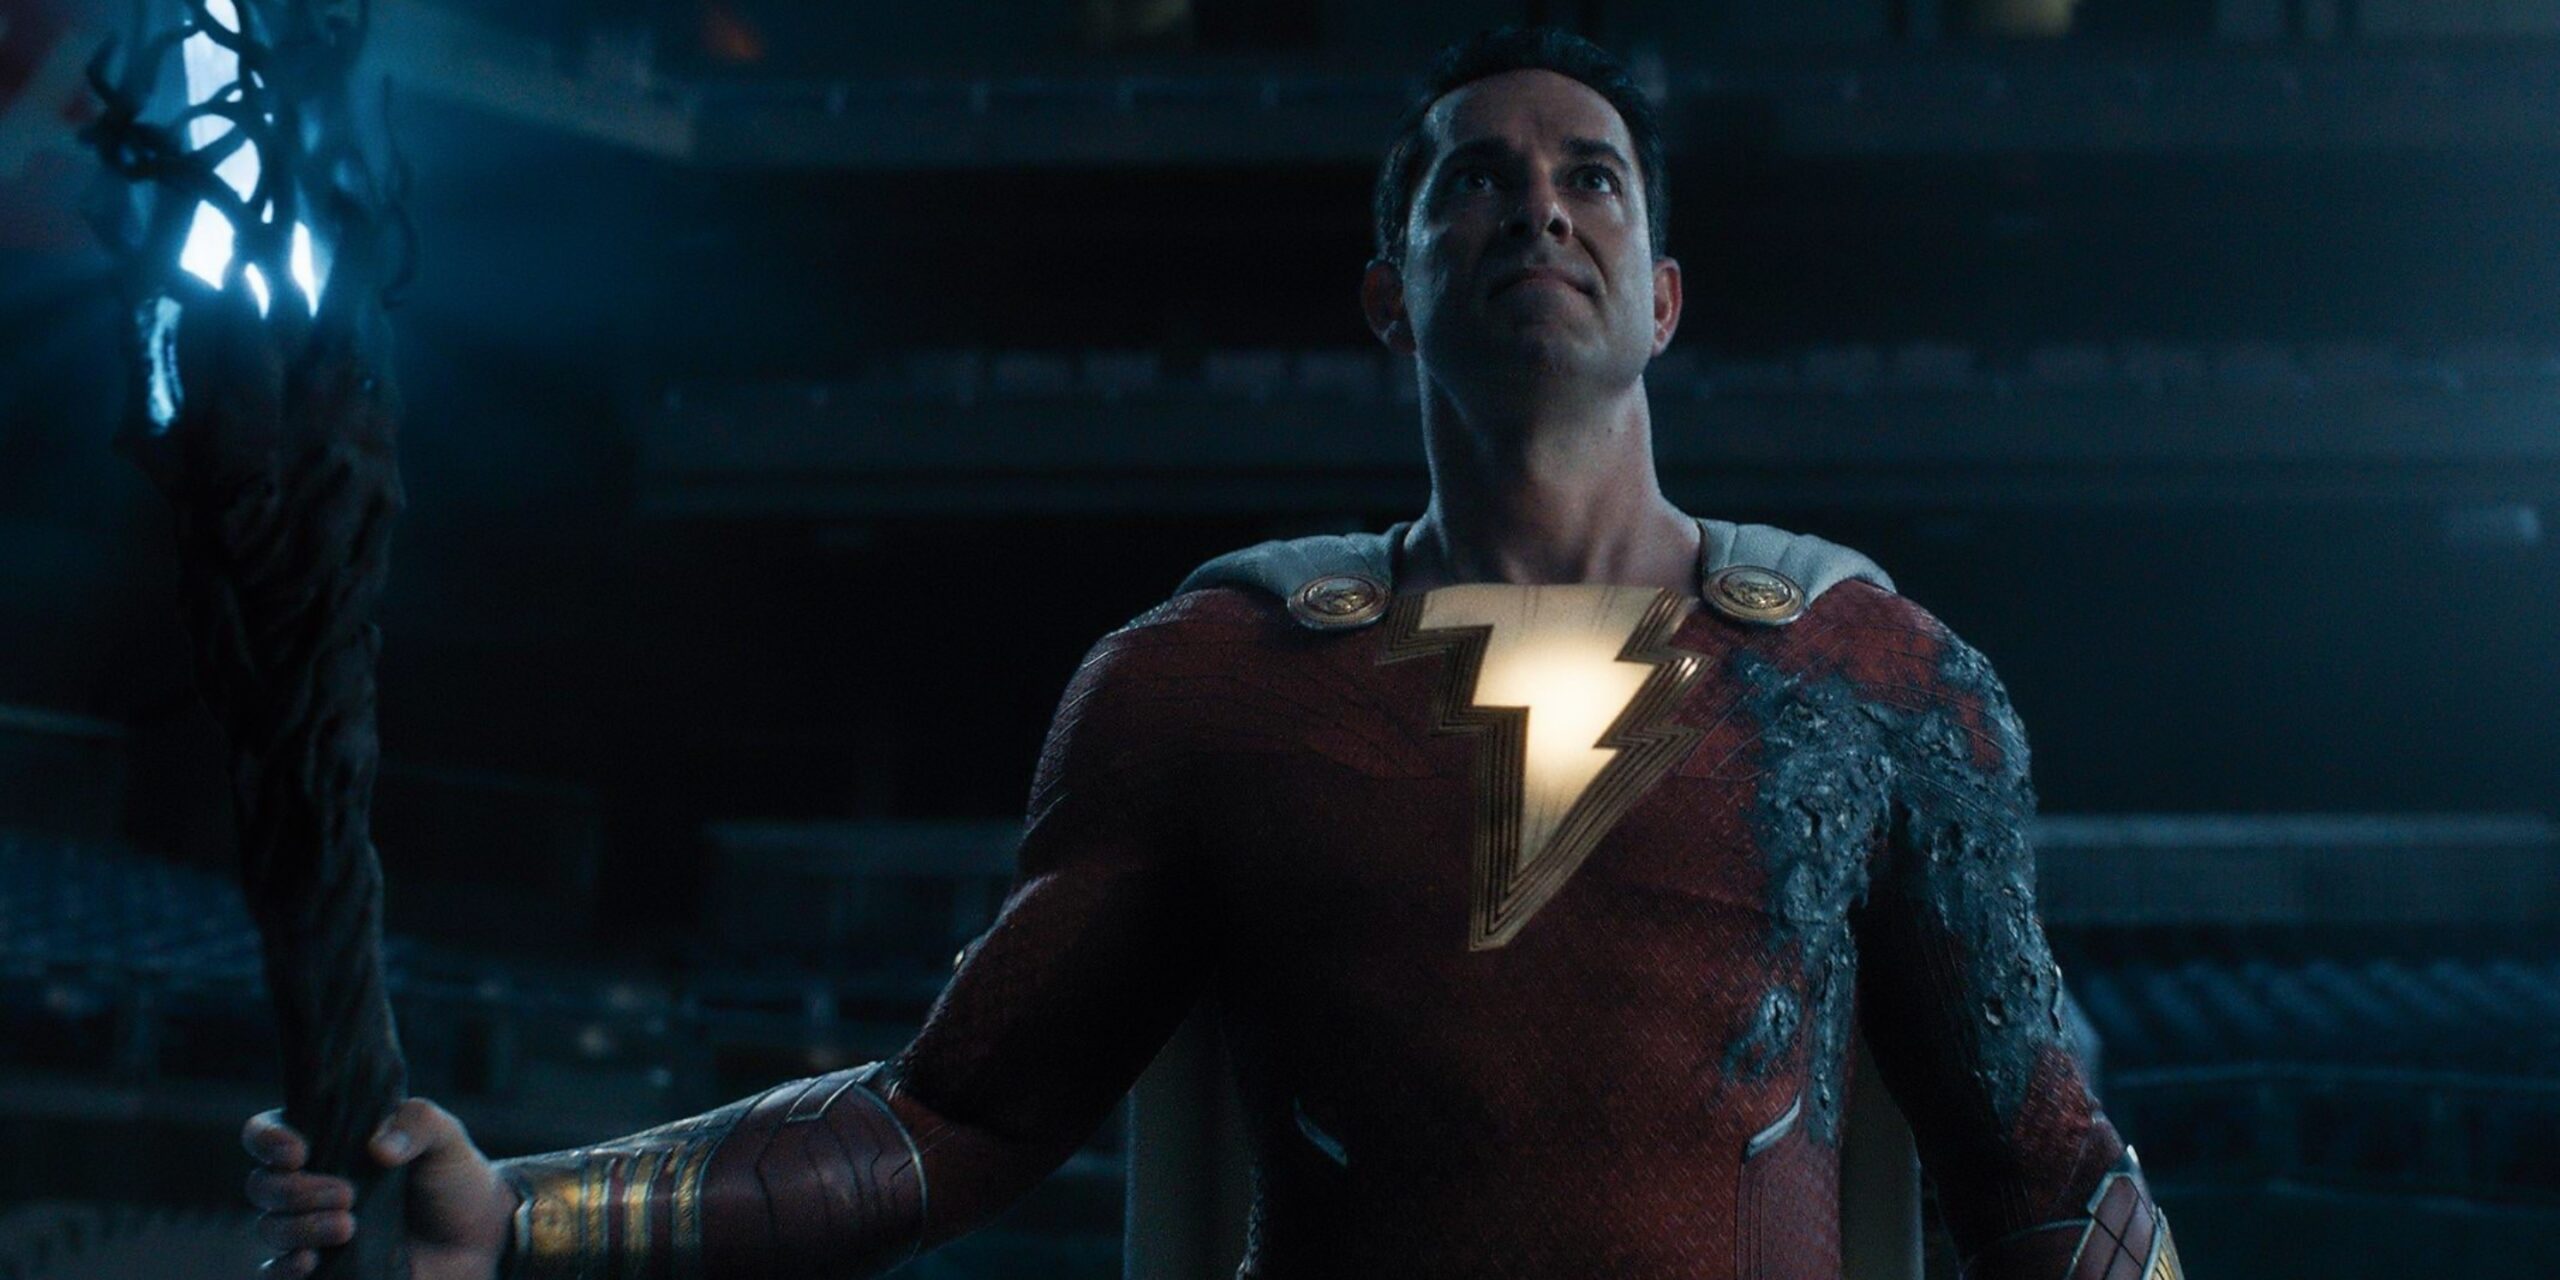 Shazam! Fury Of The Gods' Trailer: It's Time For Billy Batson